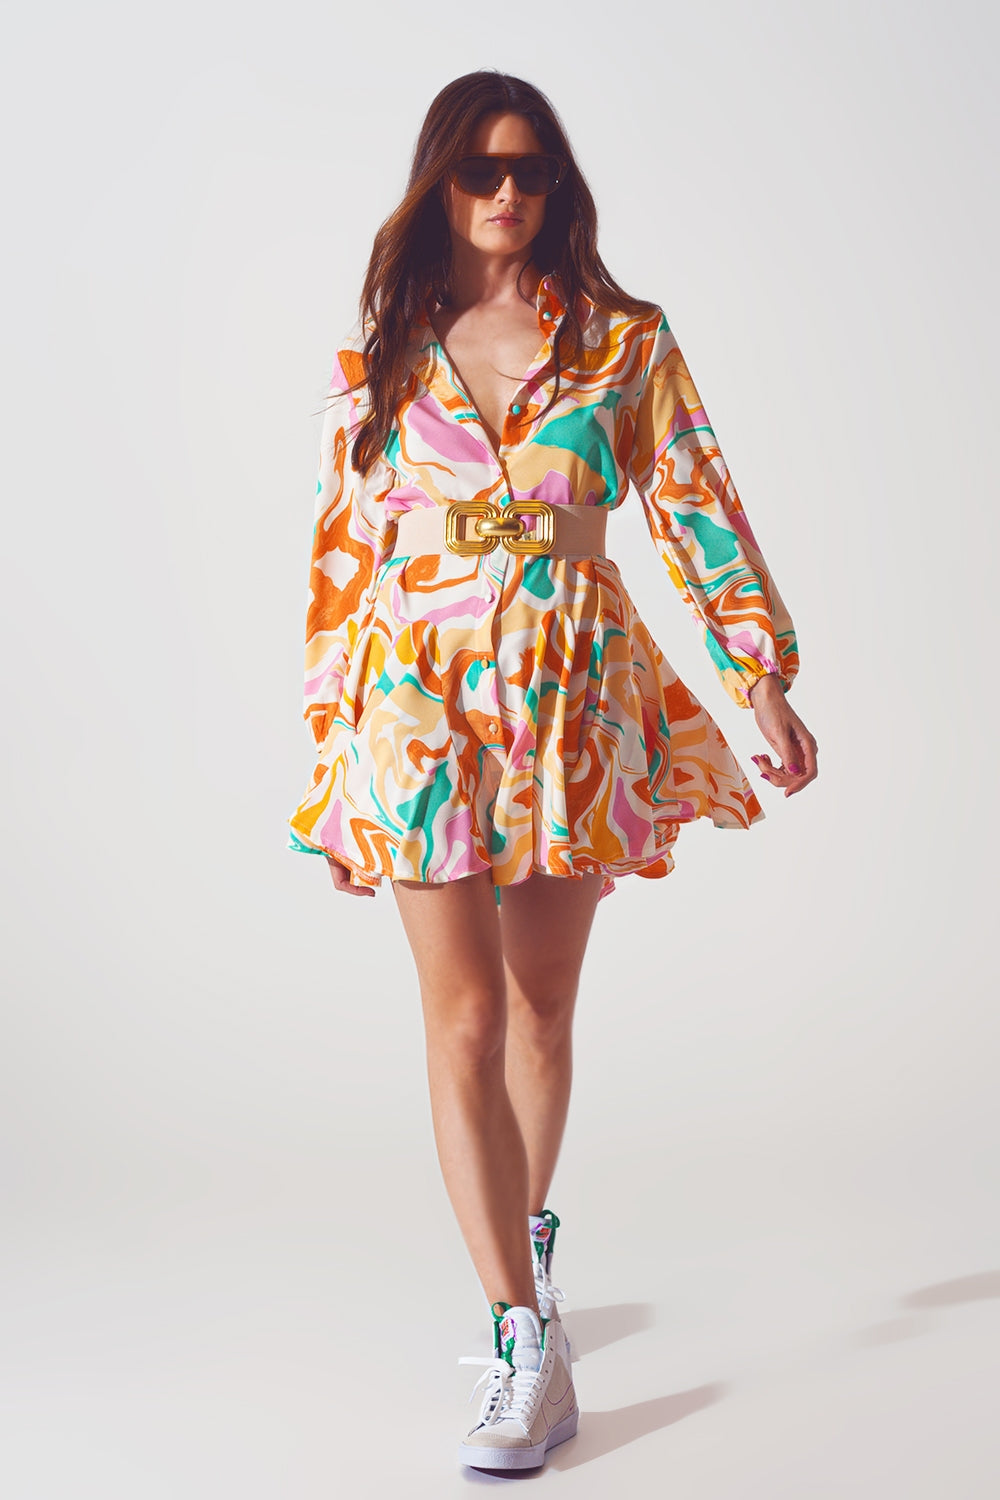 Q2 Psychedelic Multi Colorred Print Dress